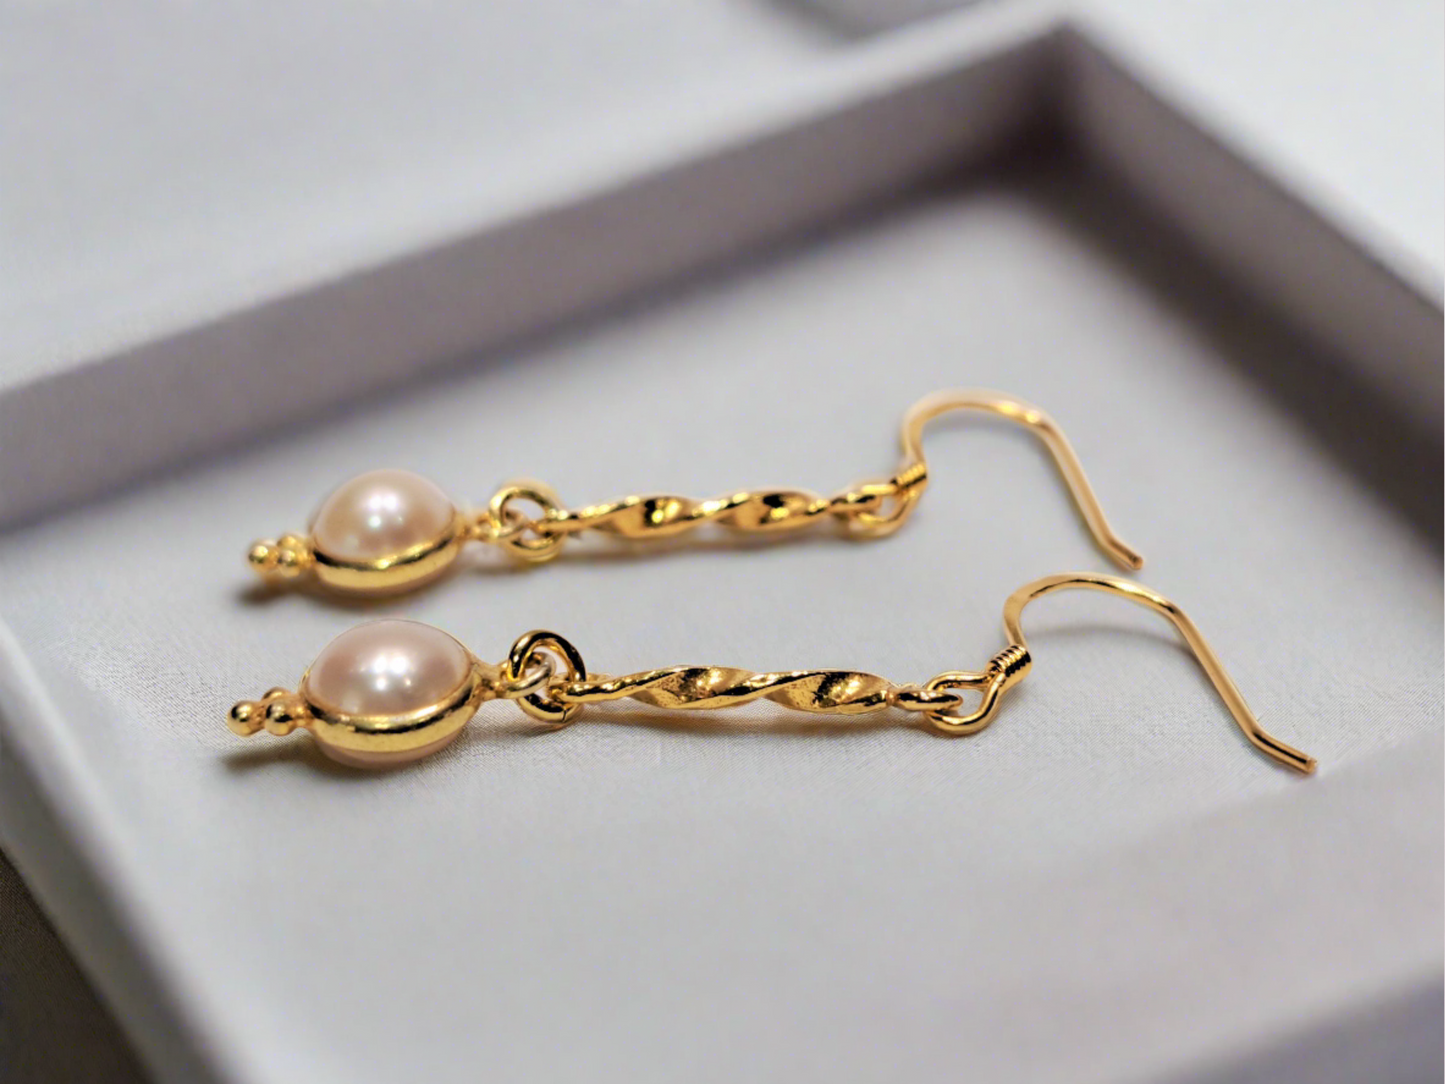 Gold plated sterling silver earrings with pearls